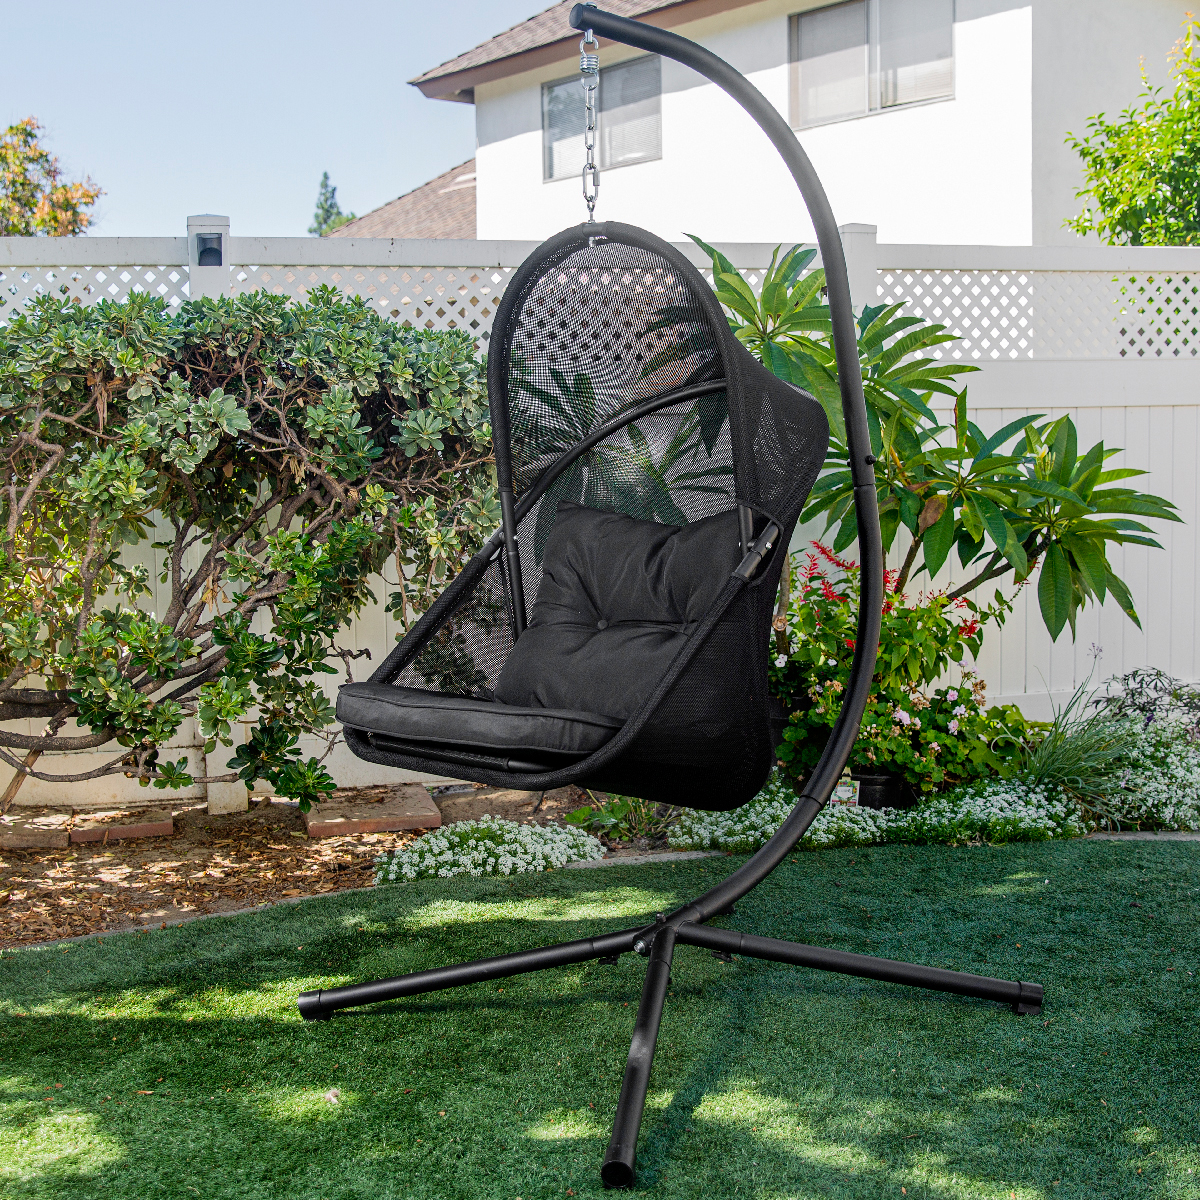 Patio Hanging Egg Chair W/ Canopy Chair with Cushion Basket Lounge Seat Collapsible Chair Seat, Black - image 1 of 7